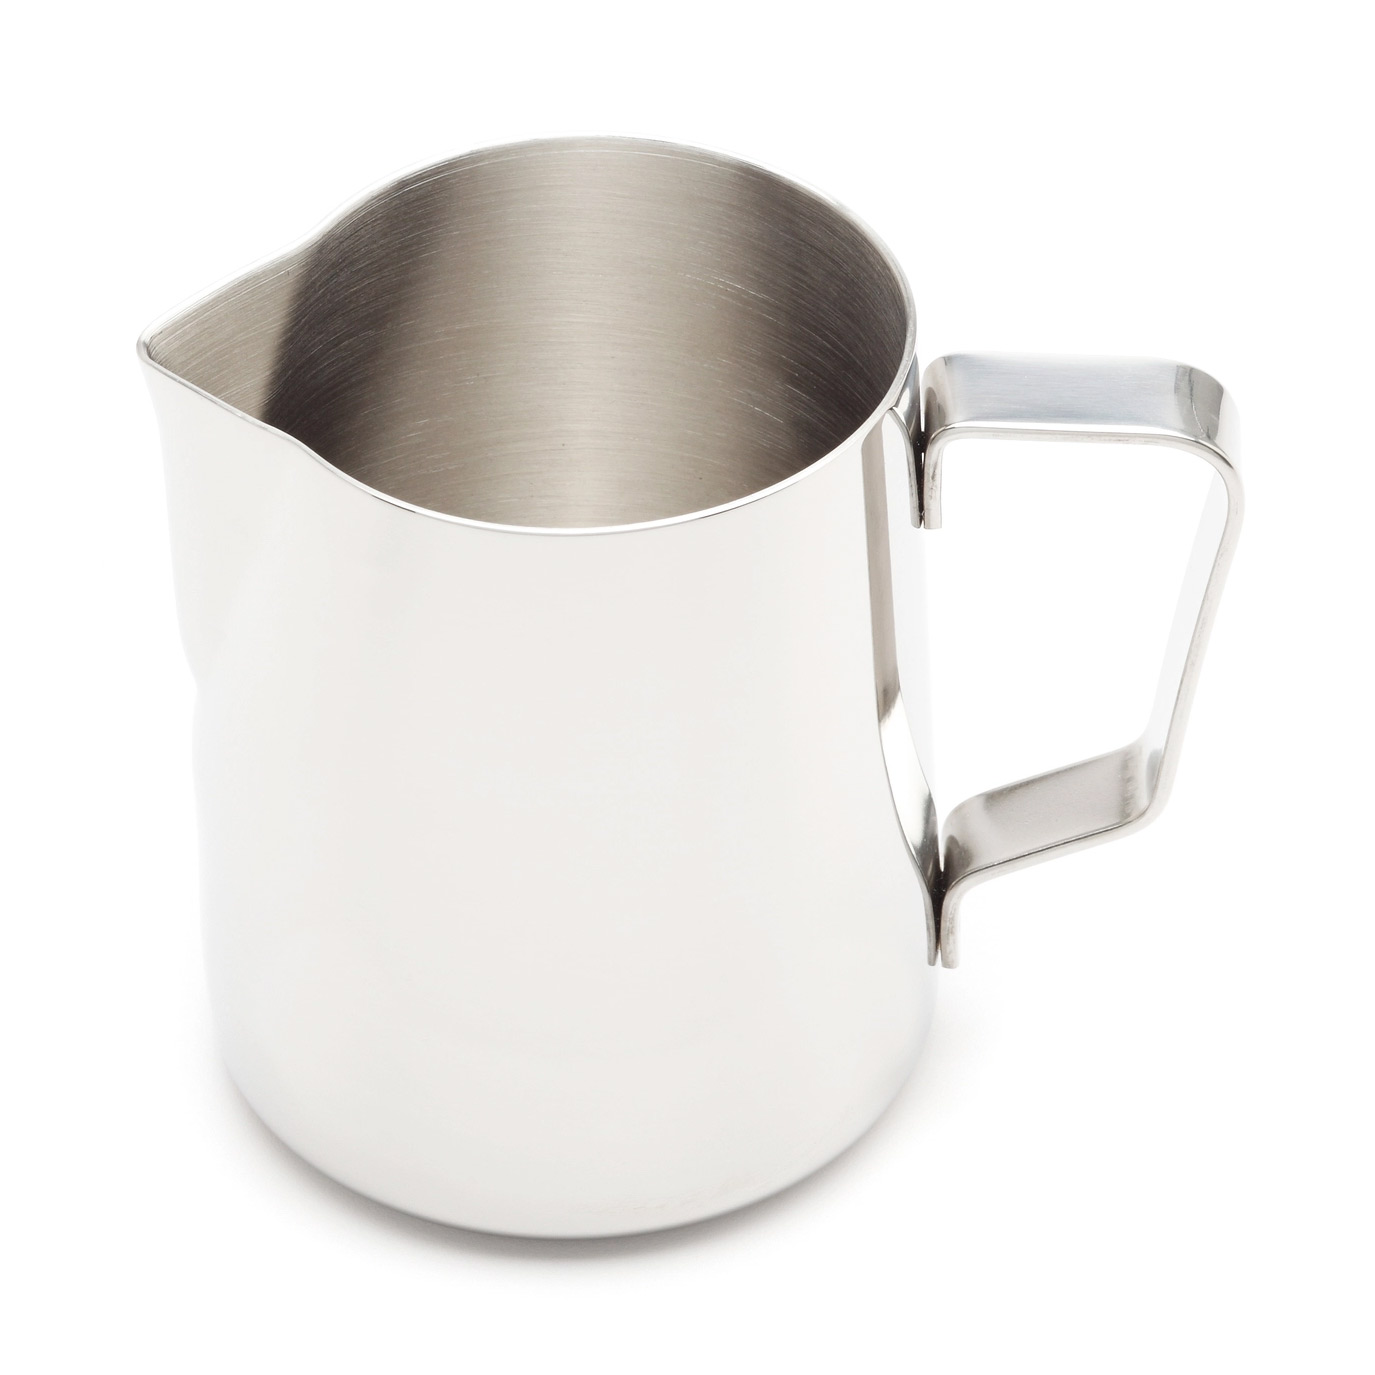 Revolution The Classic Stainless Steel Steaming Pitcher 30oz / 900ml - RV-PC30